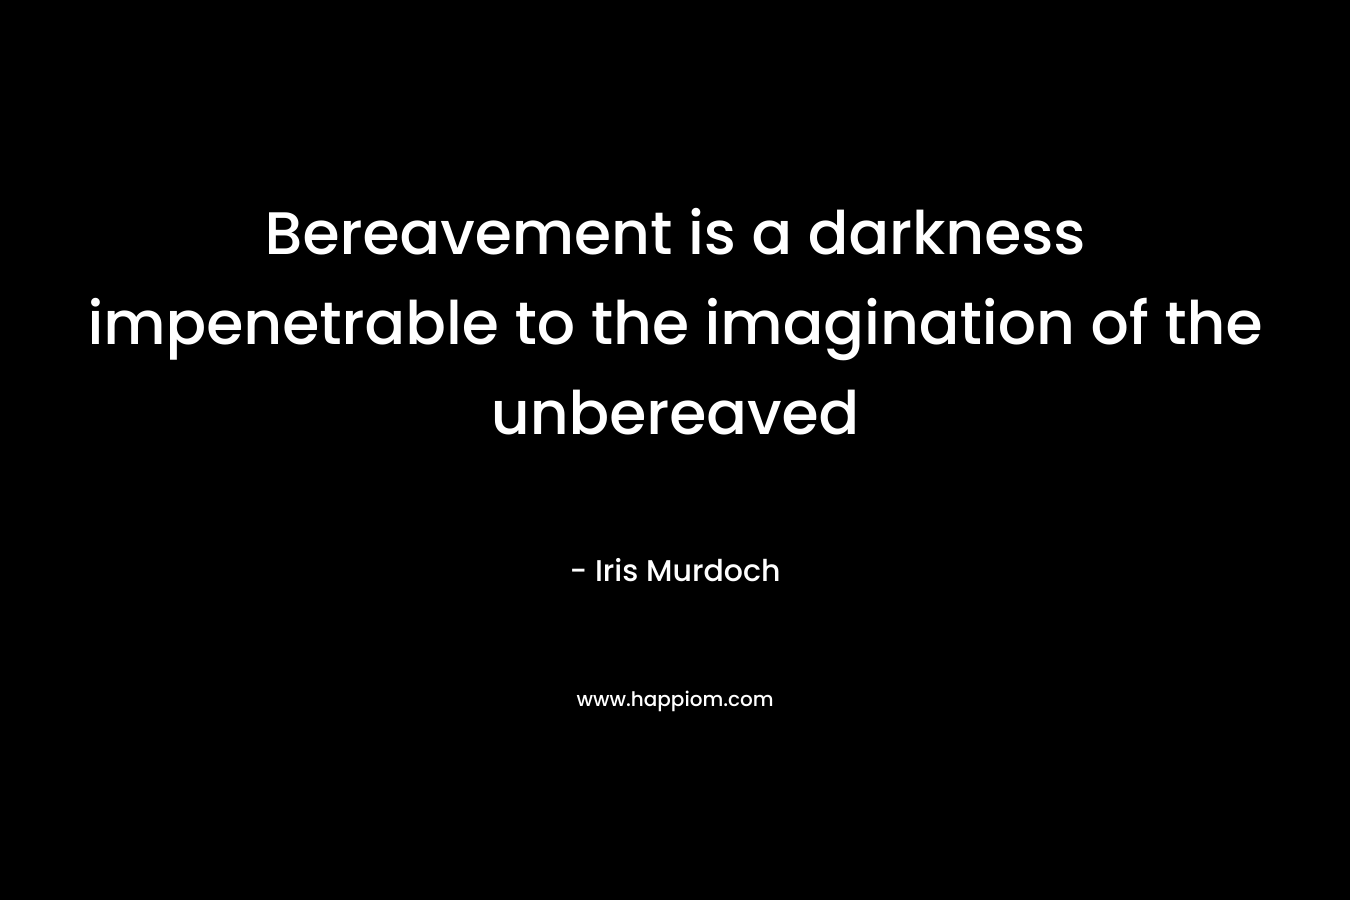 Bereavement is a darkness impenetrable to the imagination of the unbereaved – Iris Murdoch